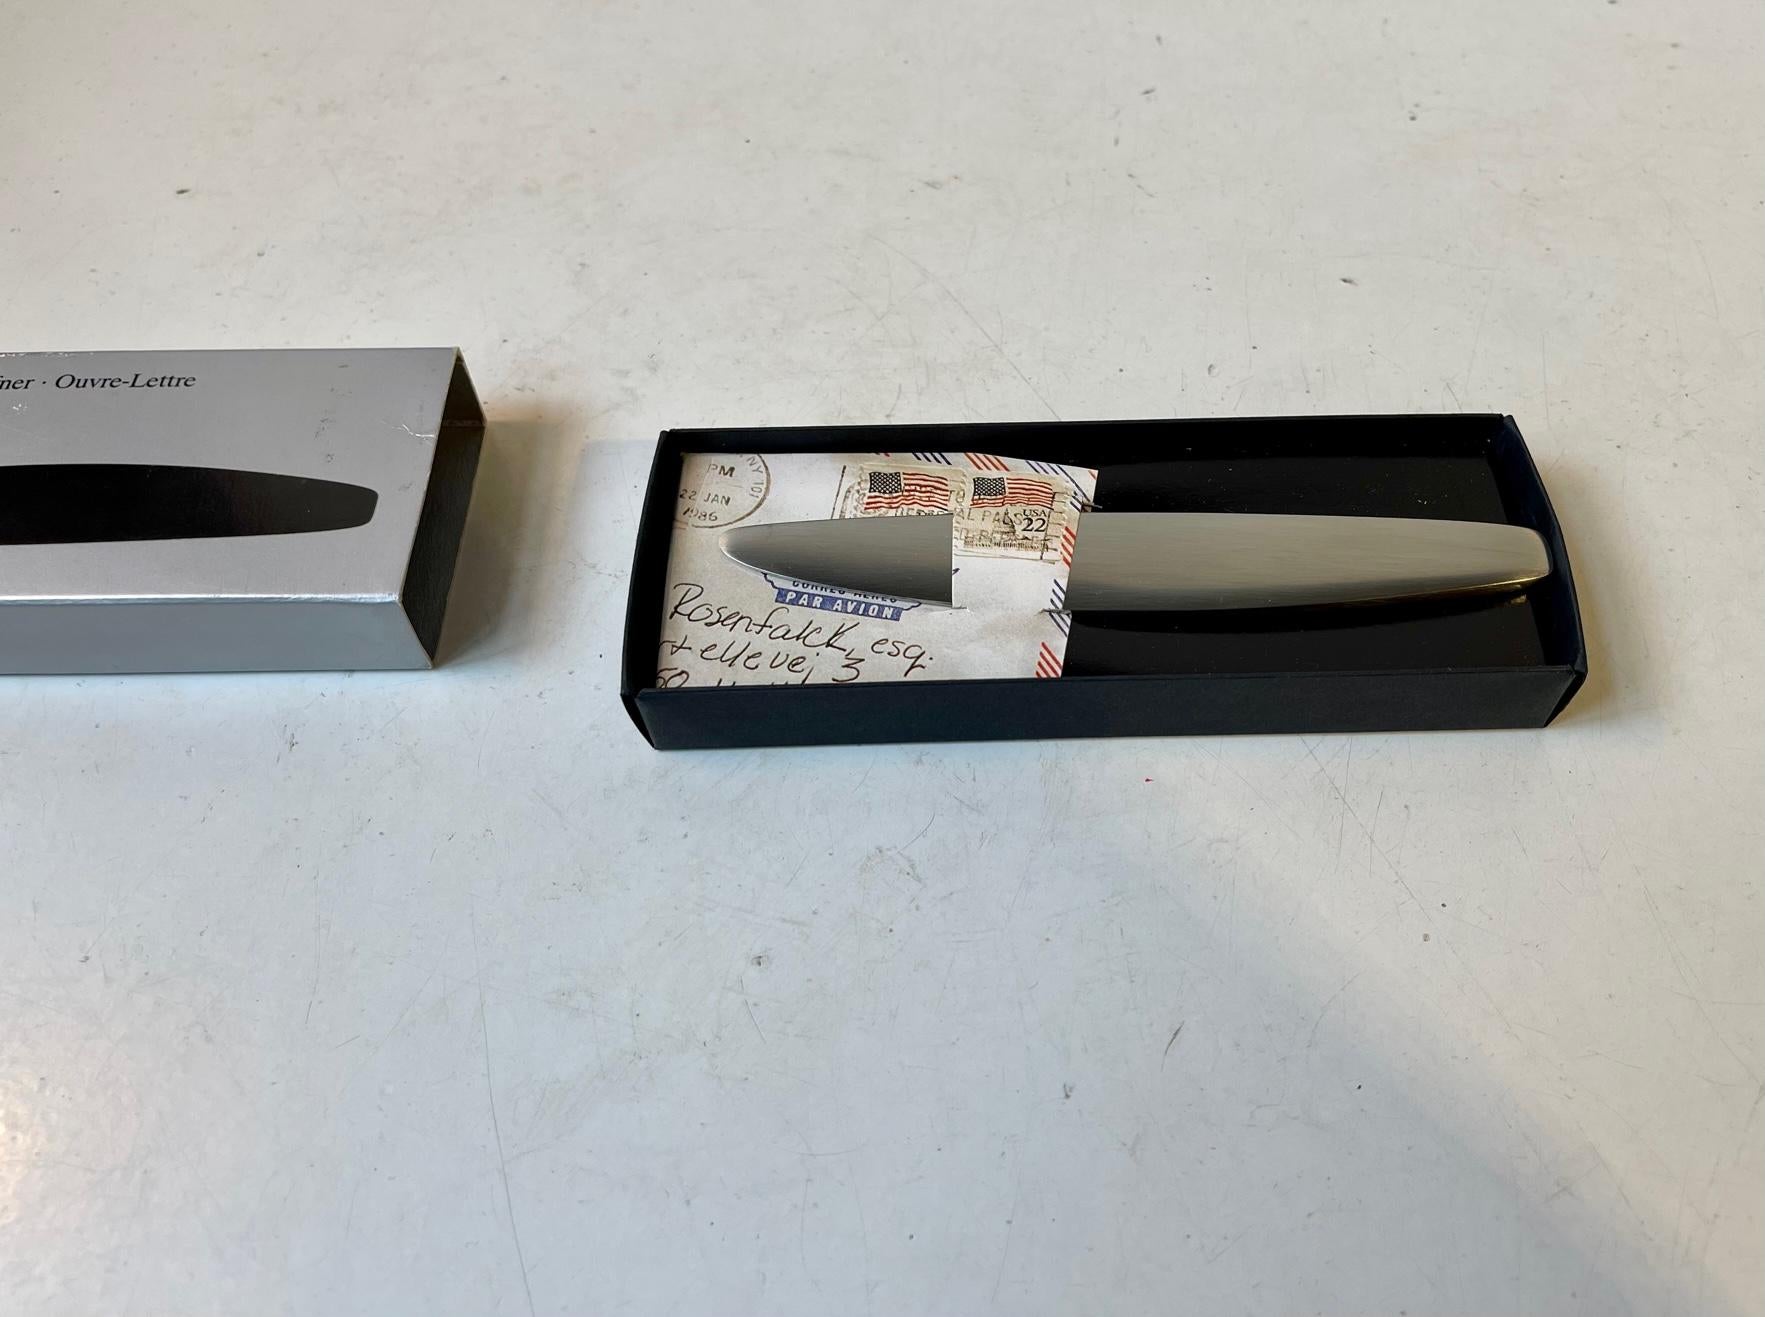 A stylish minimalist organically shaped paper knife in brushed stainless steel. Designed by Henning Koppel during the 1980s and made by Georg Jensen in Denmark during the 1990s. Its has been discontinued since. It is signed to the inside: Georg